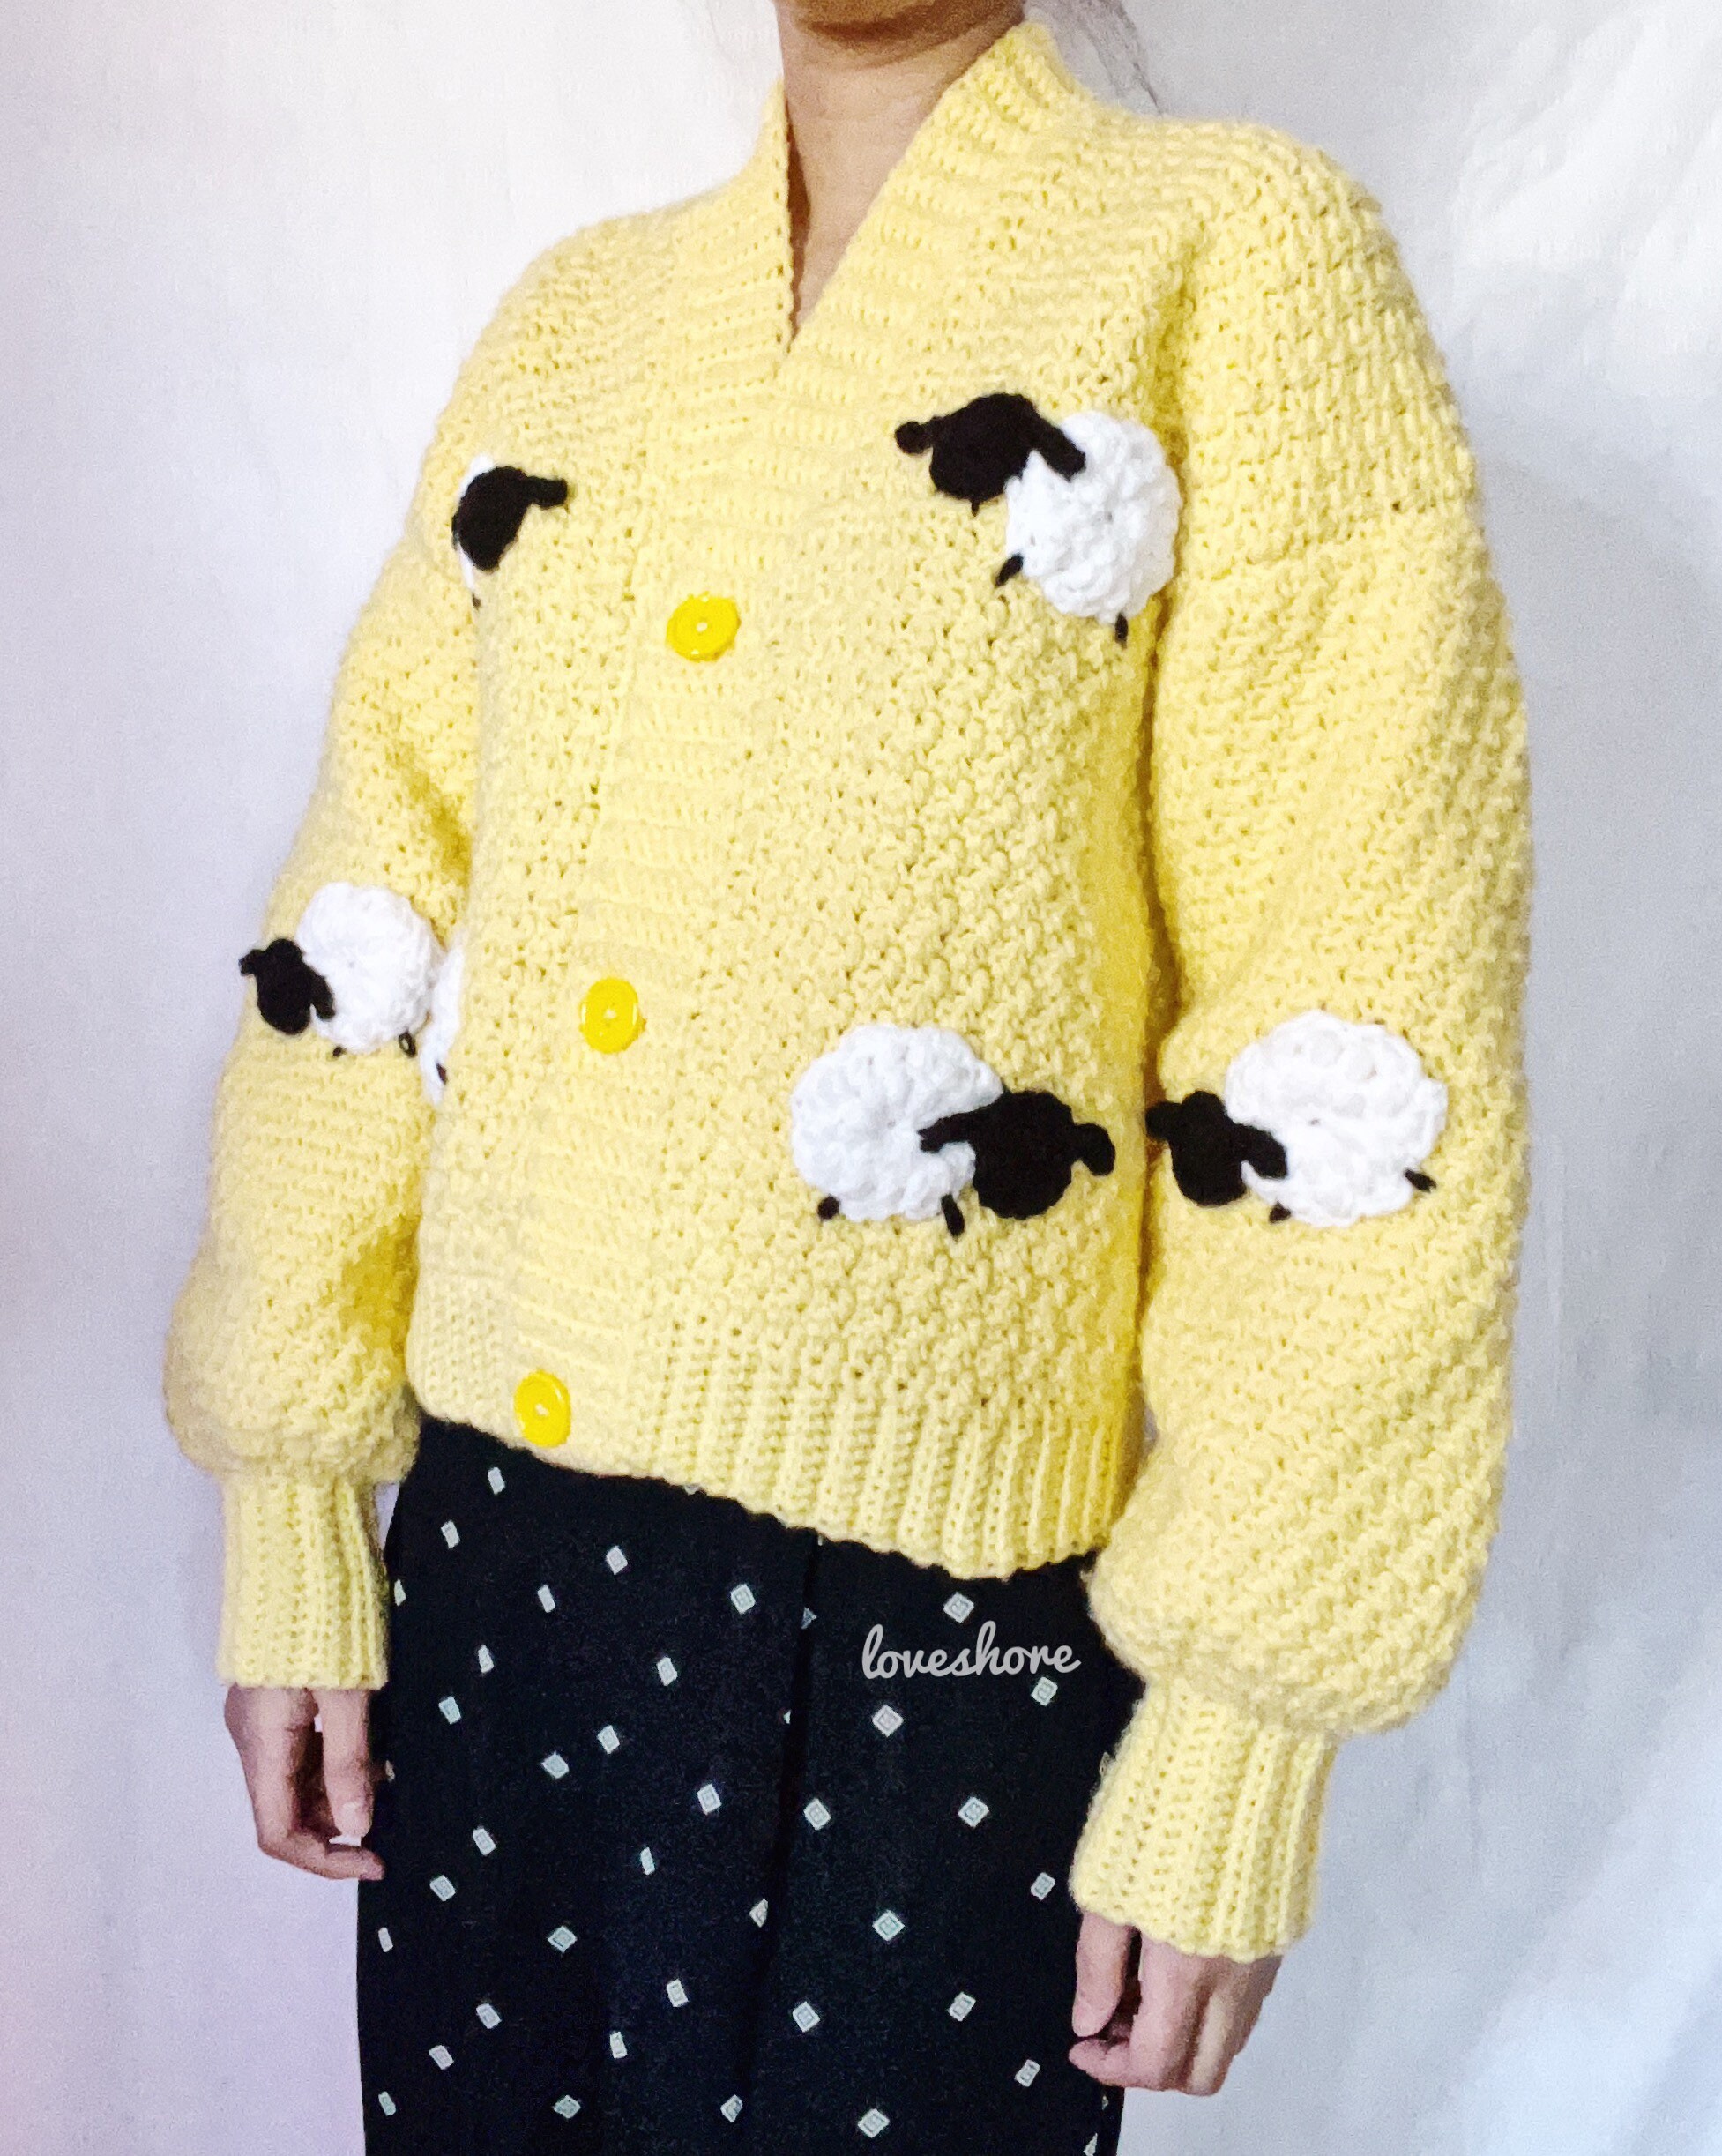 Crochet Pattern Round Up: Chunky Cardigans! – PINK SHEEP DESIGN